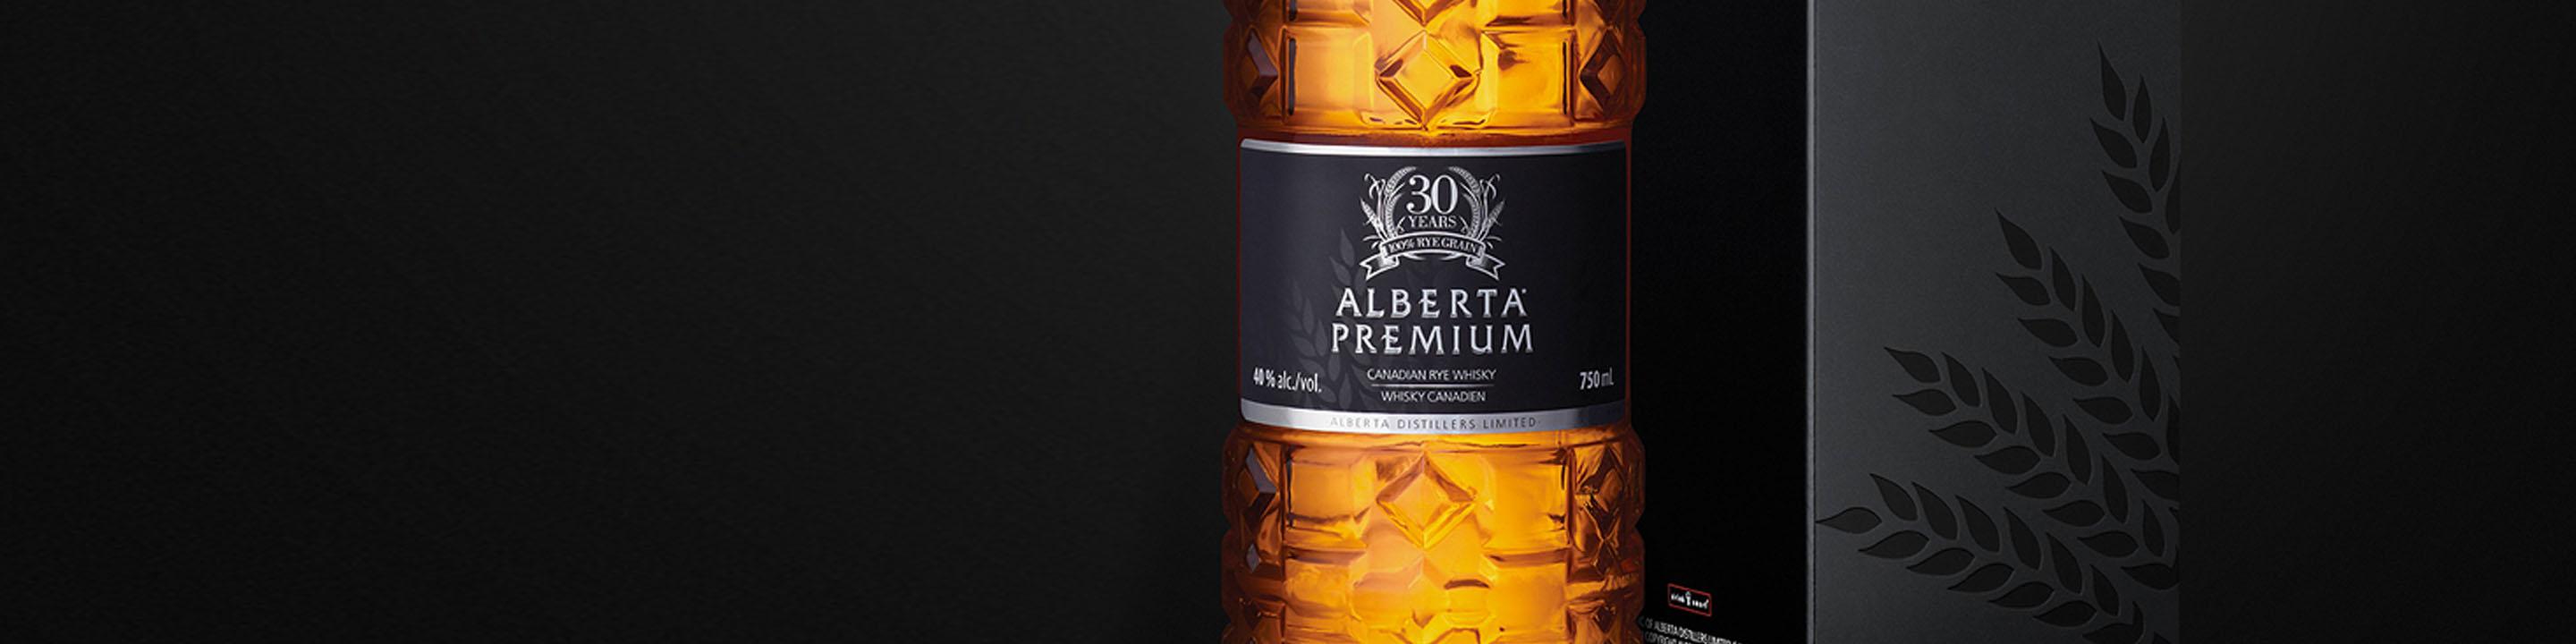 After years of perfecting their craft, the master distillers at Alberta Distillers wanted to continue to push the rye envelope and come up with not just another rye whisky, but a better rye whisky. And so, Alberta® Rye Dark Batch™ was born. 

Buy Alberta online now from nearby liquor stores via Minibar Delivery.